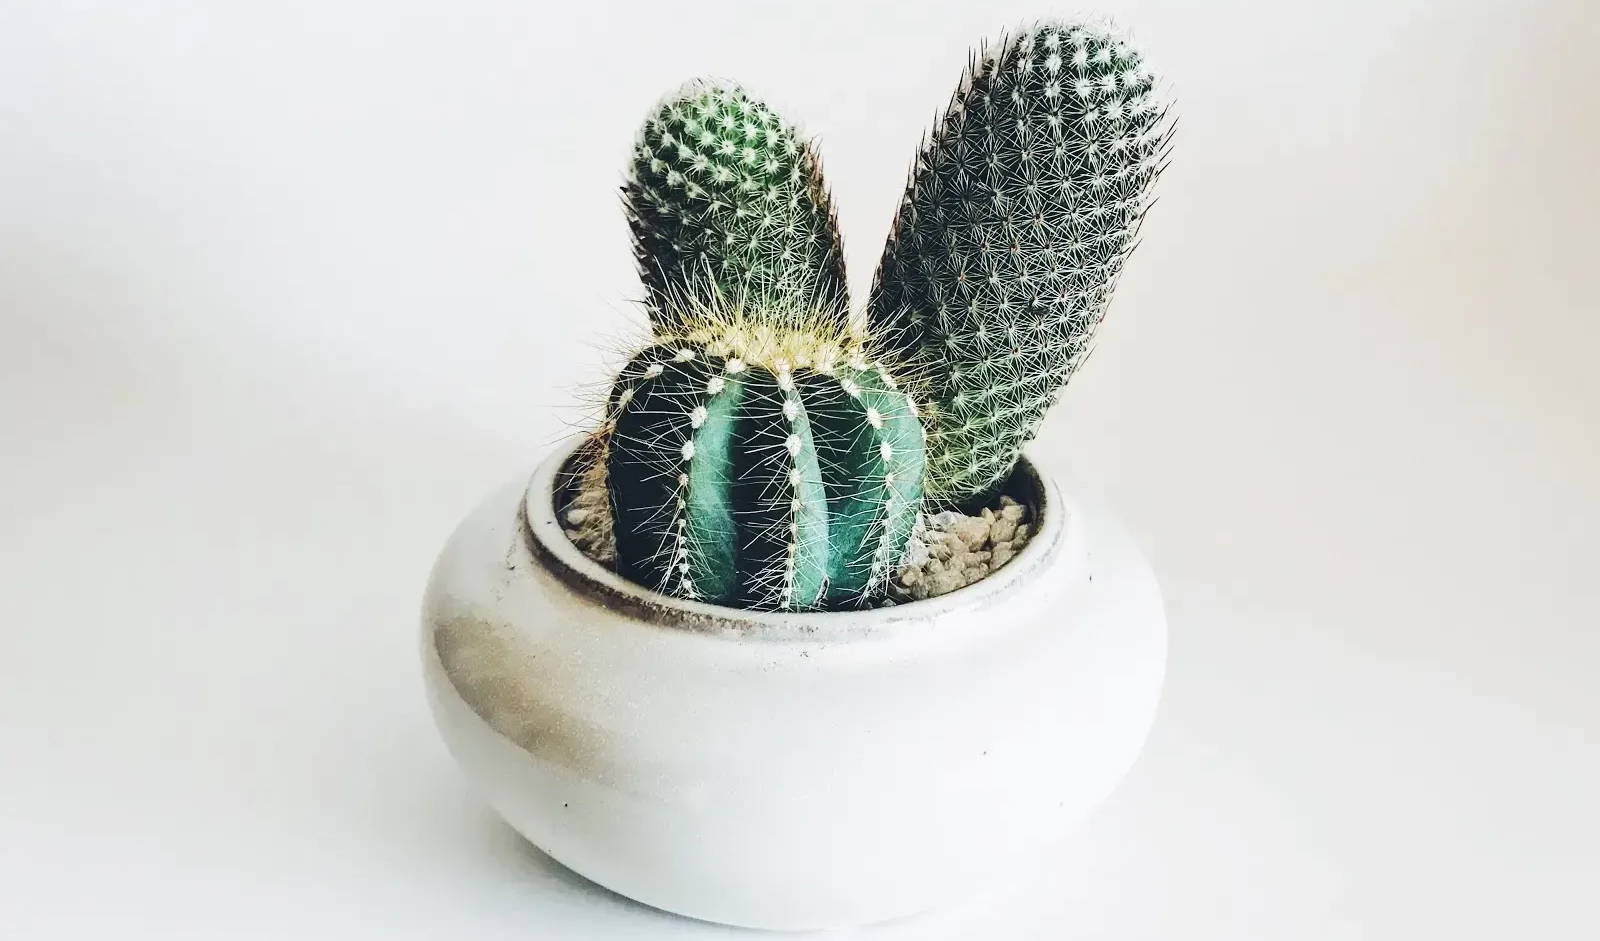 Three cacti sit in a bowl together.